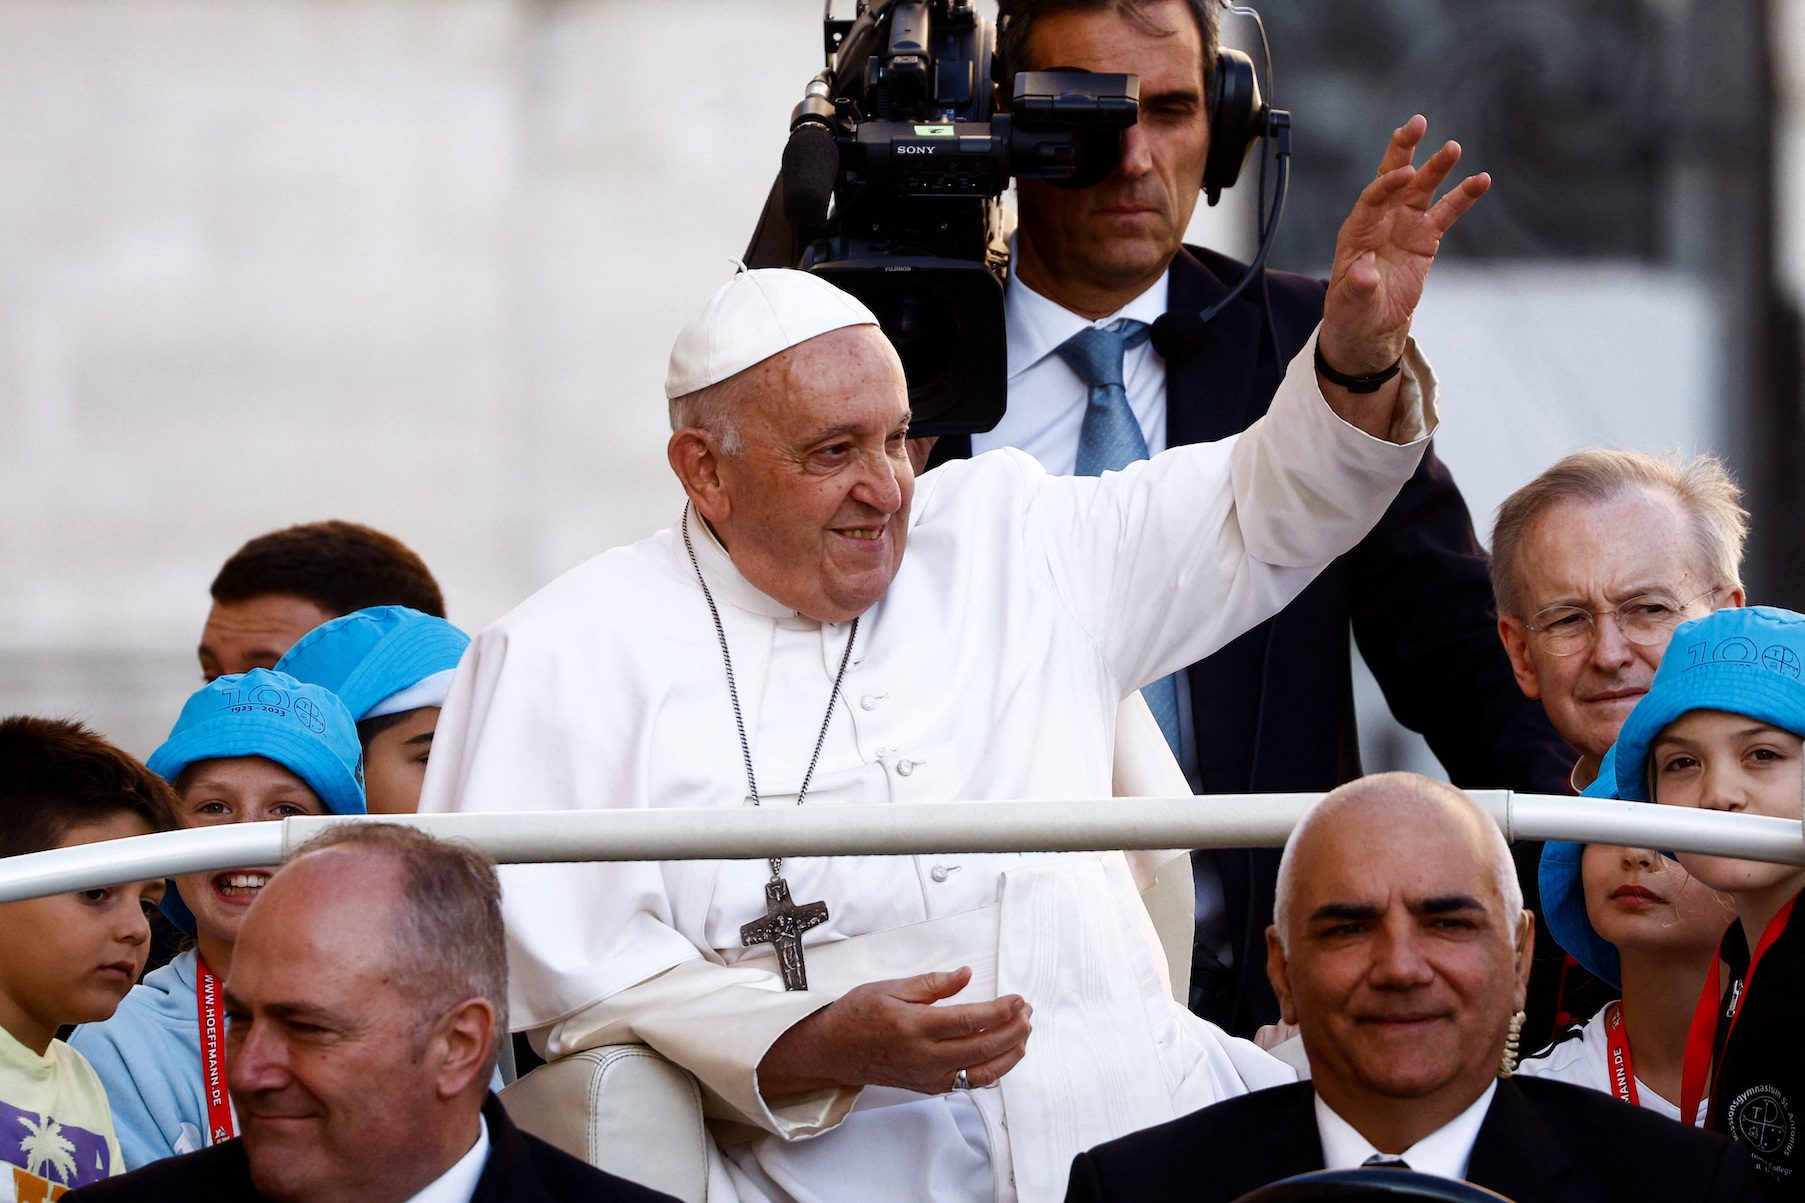 Pope Francis, condemning body shaming, uses personal example from boyhood